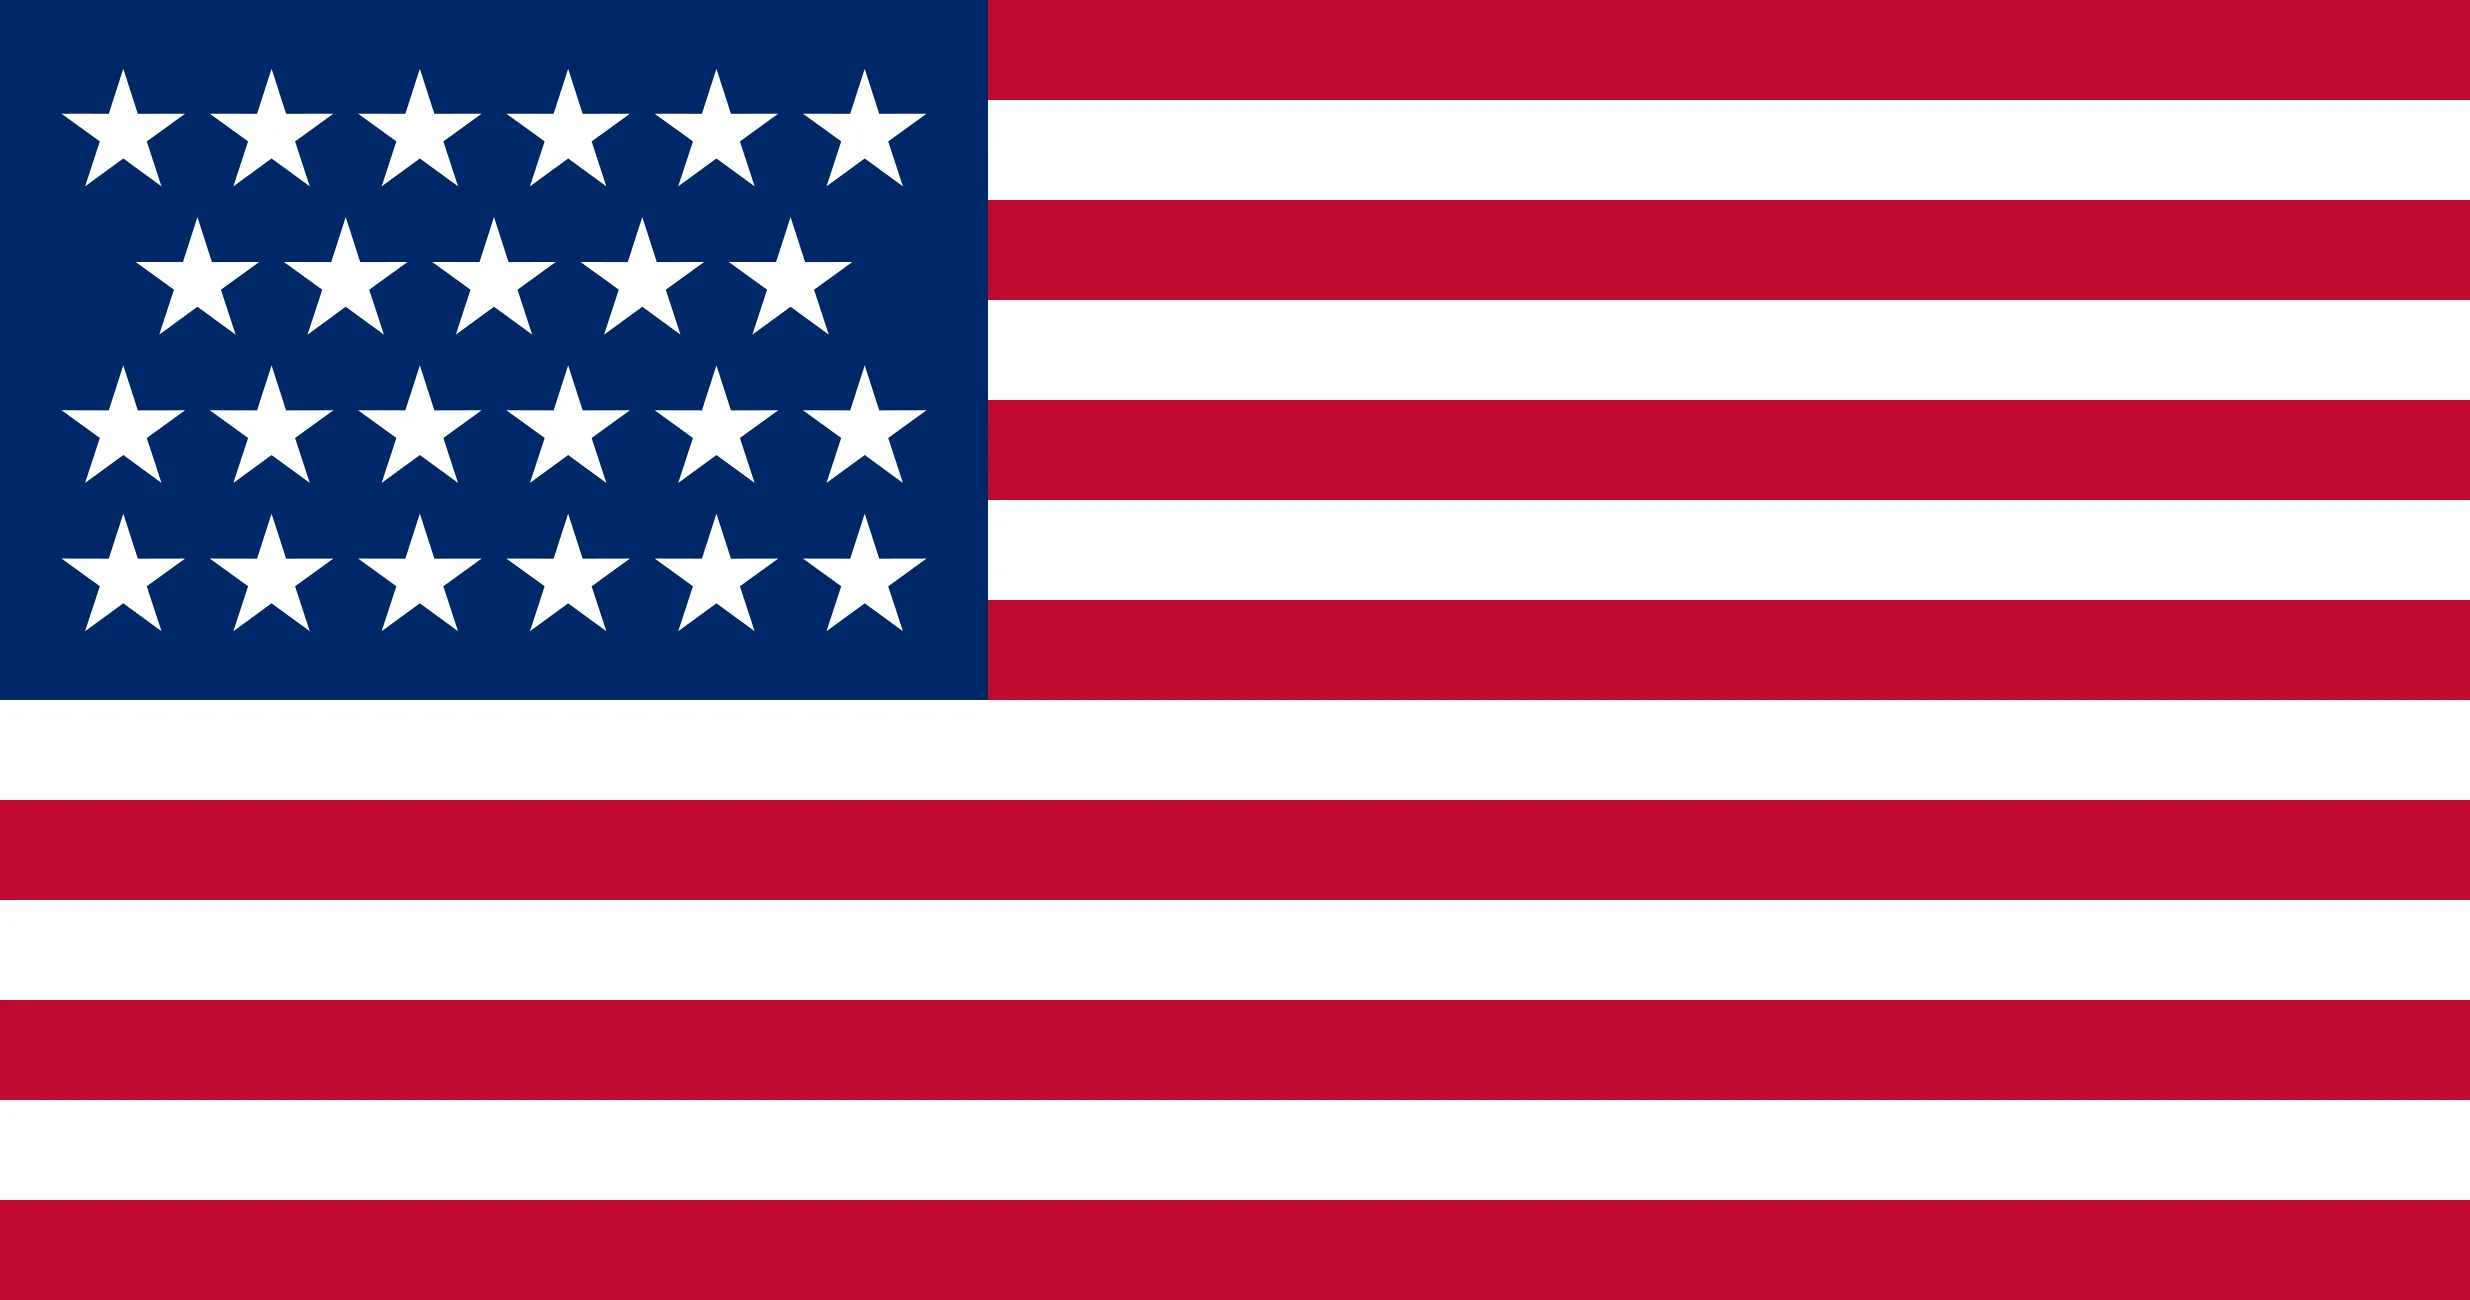 US Flag with 23 stars